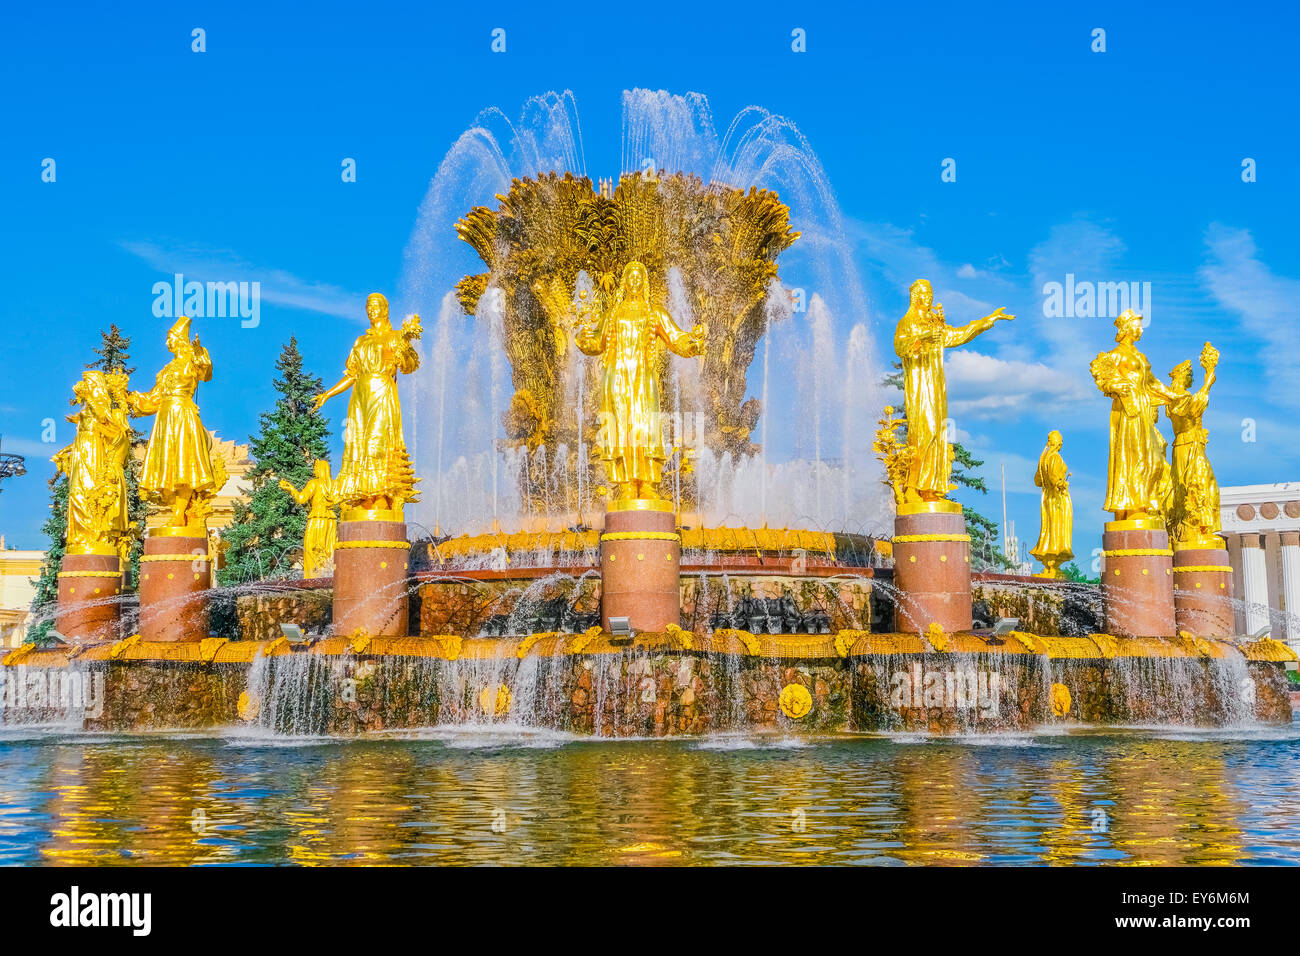 Fountain Friendship of nations, Moscow, Russia Stock Photo